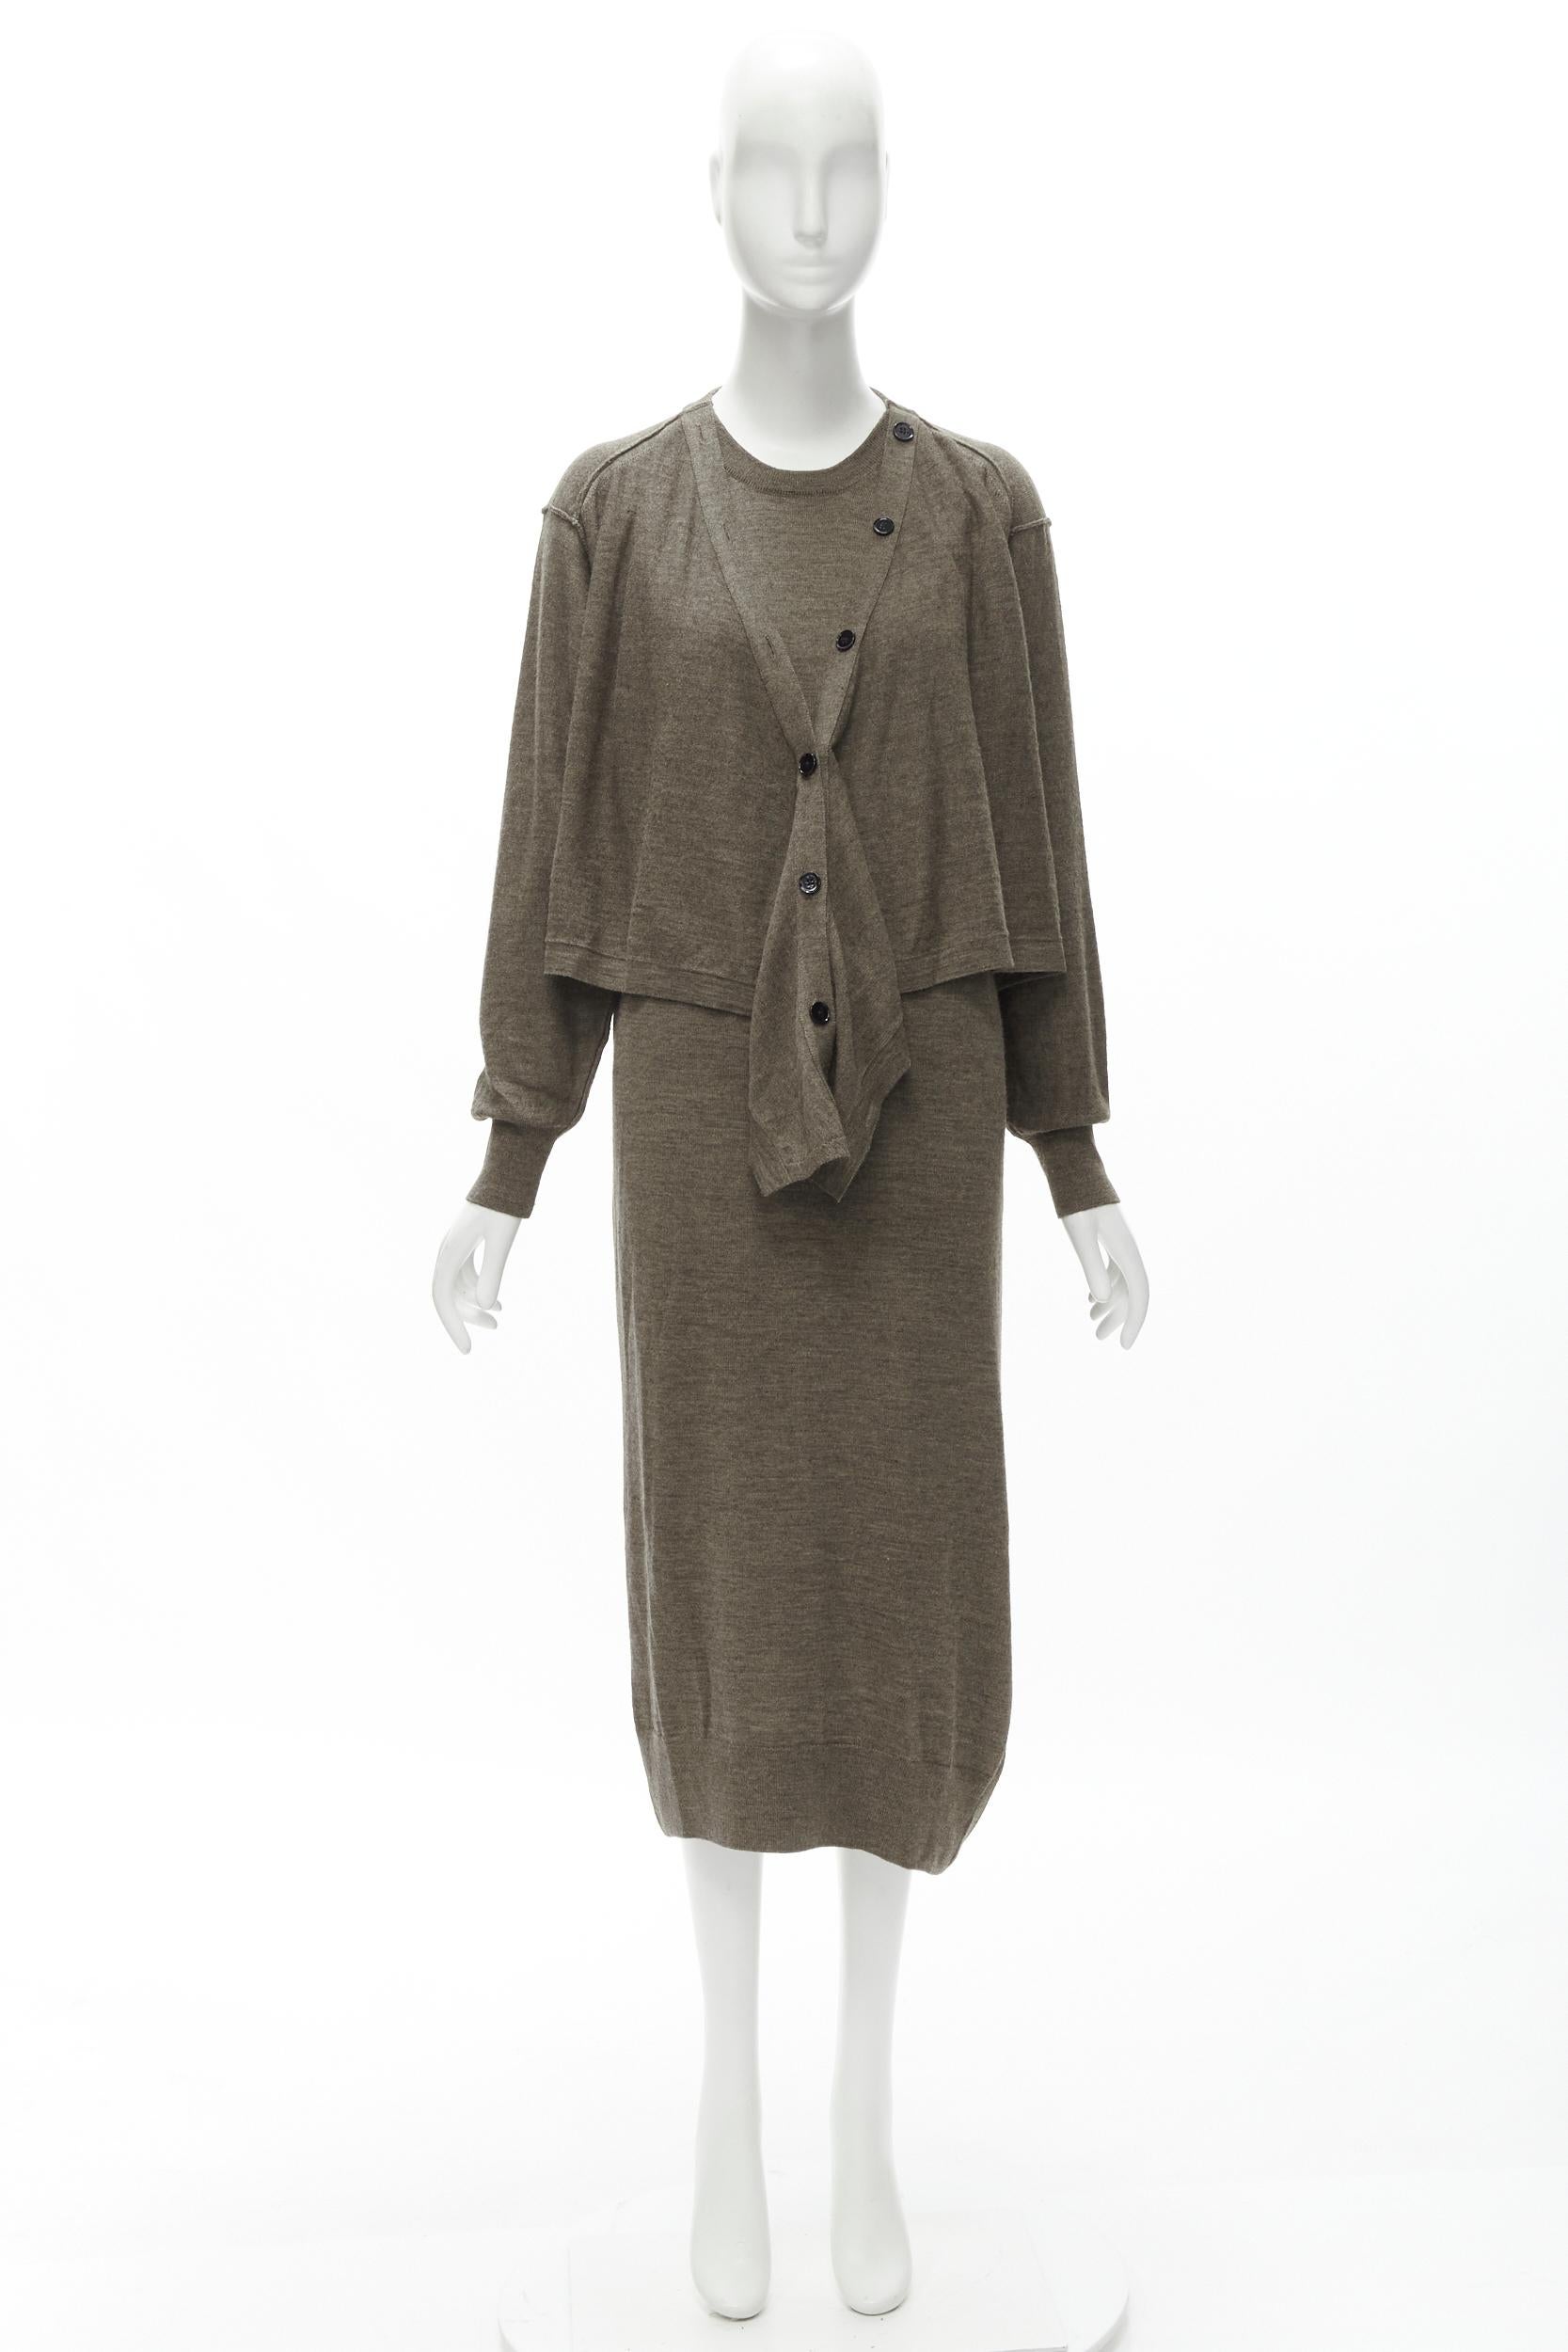 LEMAIRE brown merino wool blend tie front cardigan sweater dress XS For Sale 4